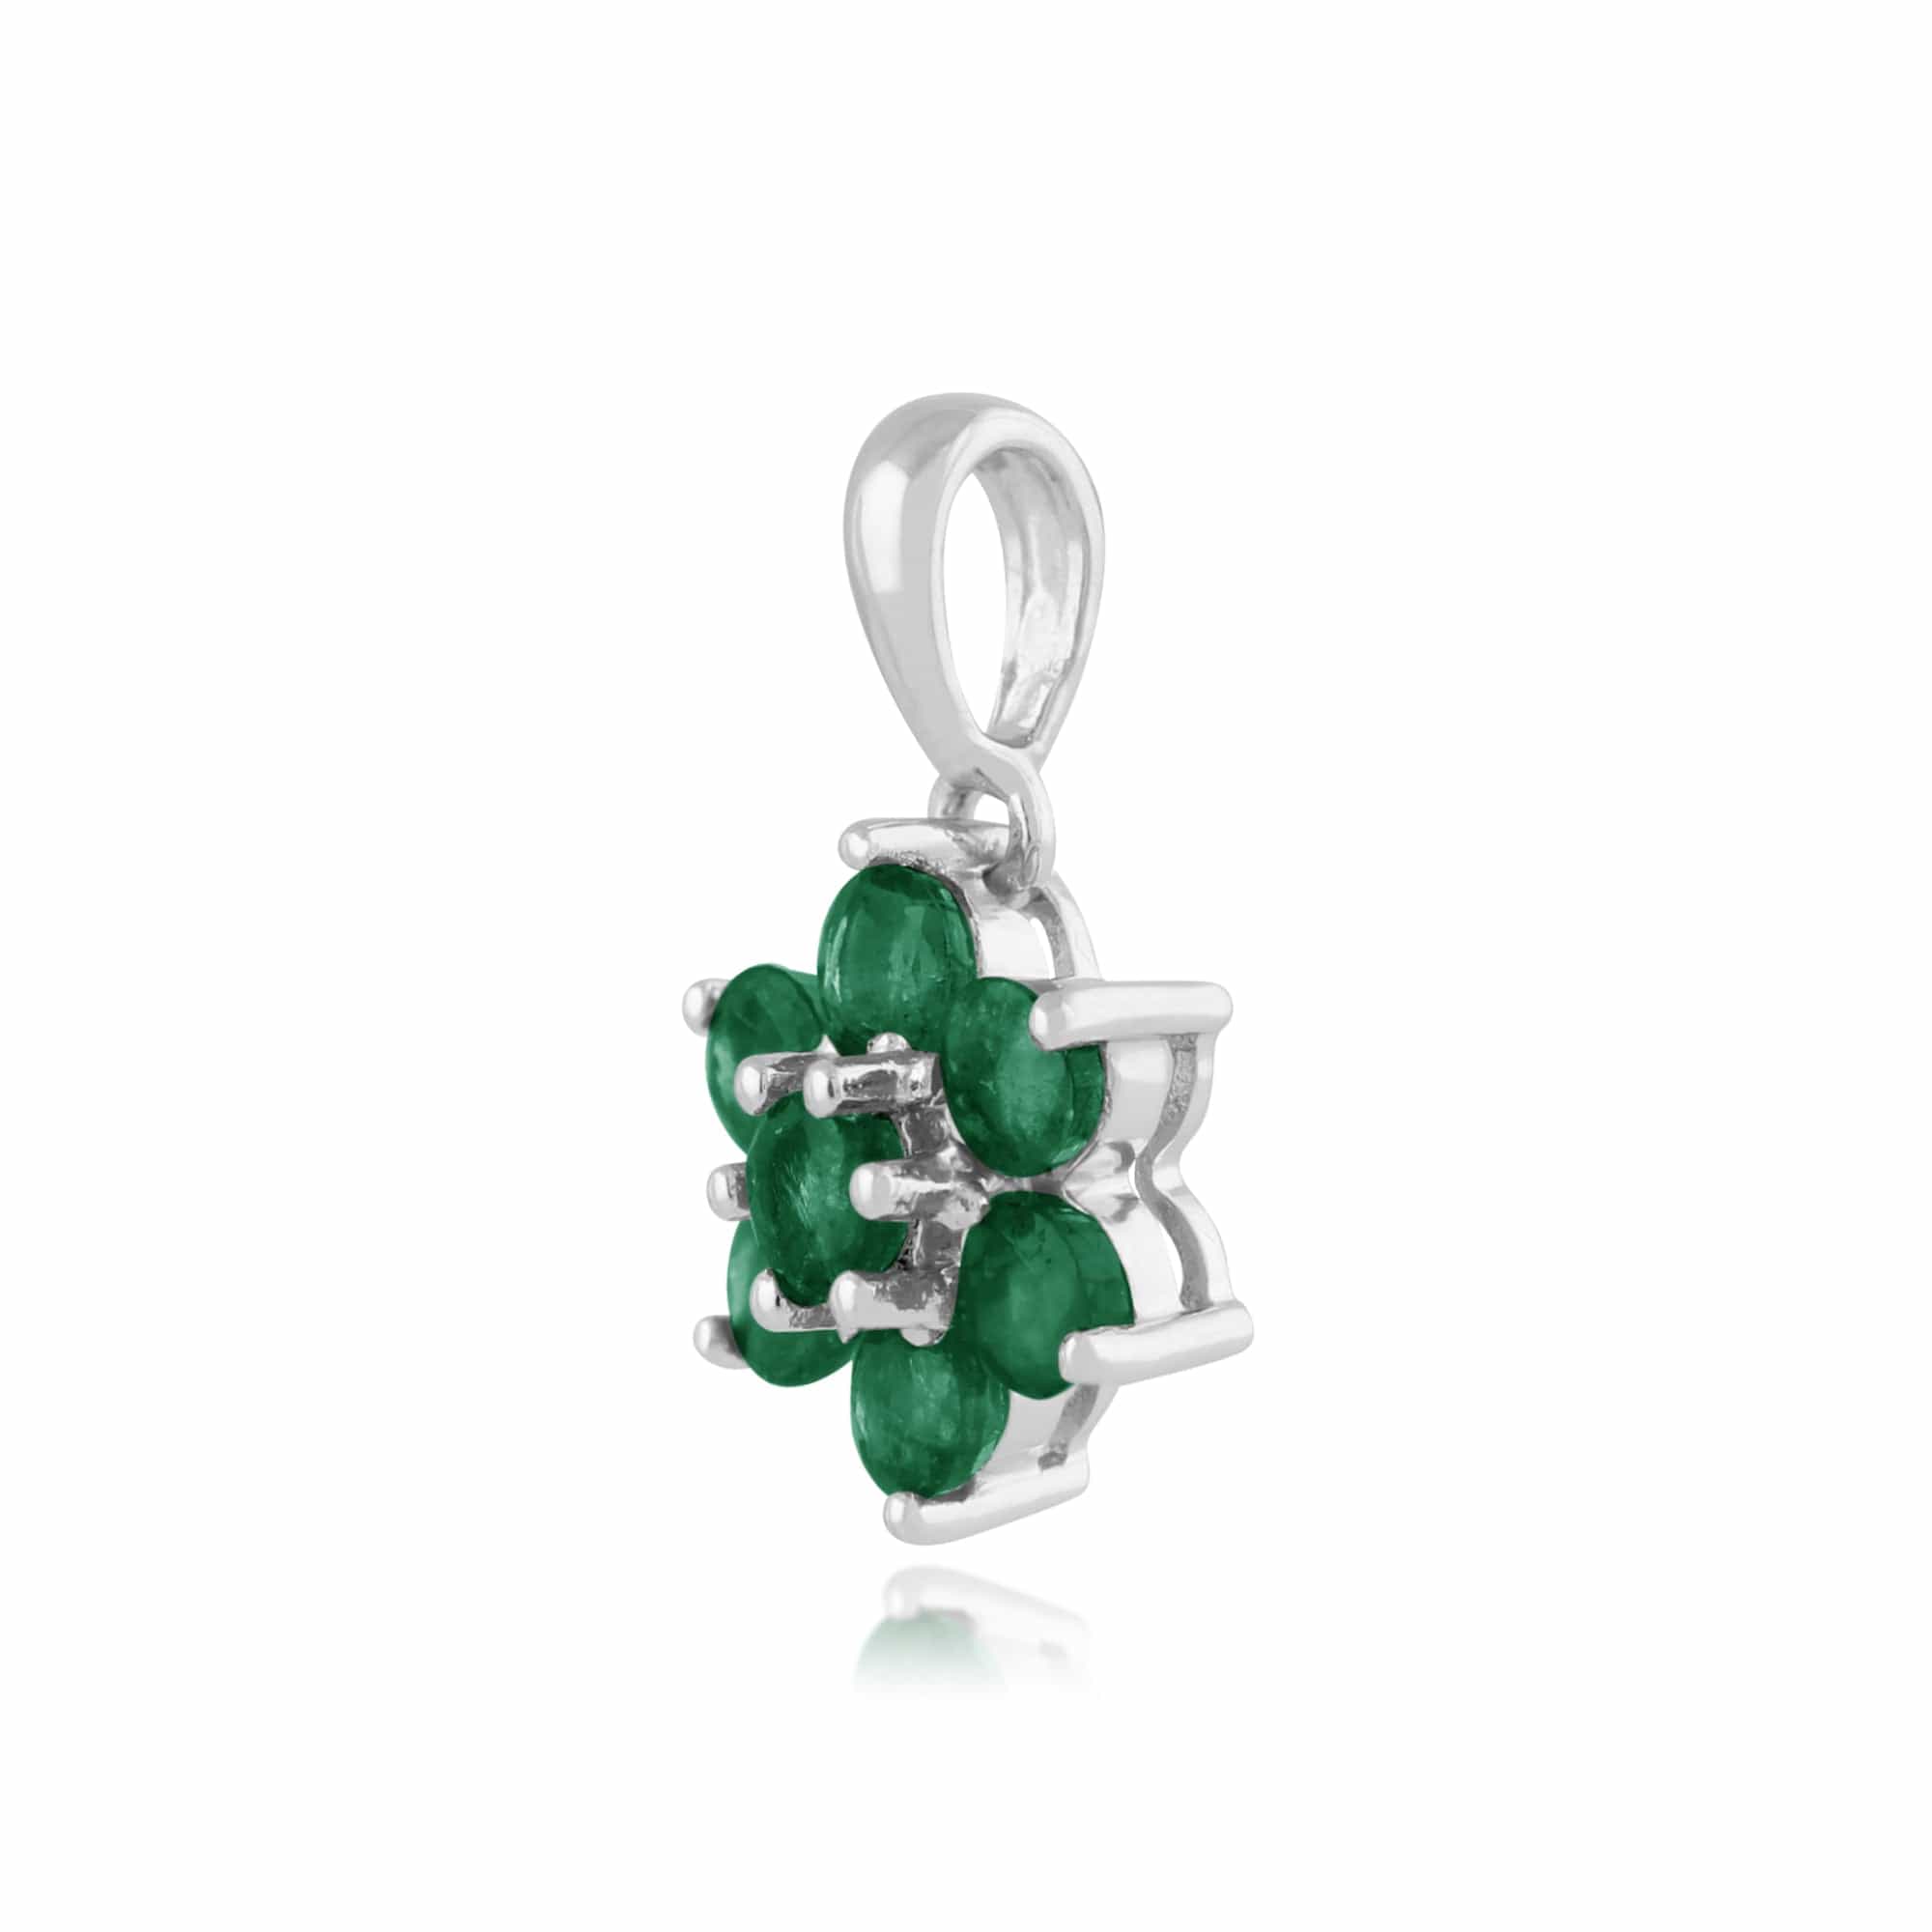 270E014009925-270P0169089 Floral Round Emerald Flower Cluster Stud Earrings & Pendant Set in 925 Sterling Silver 5